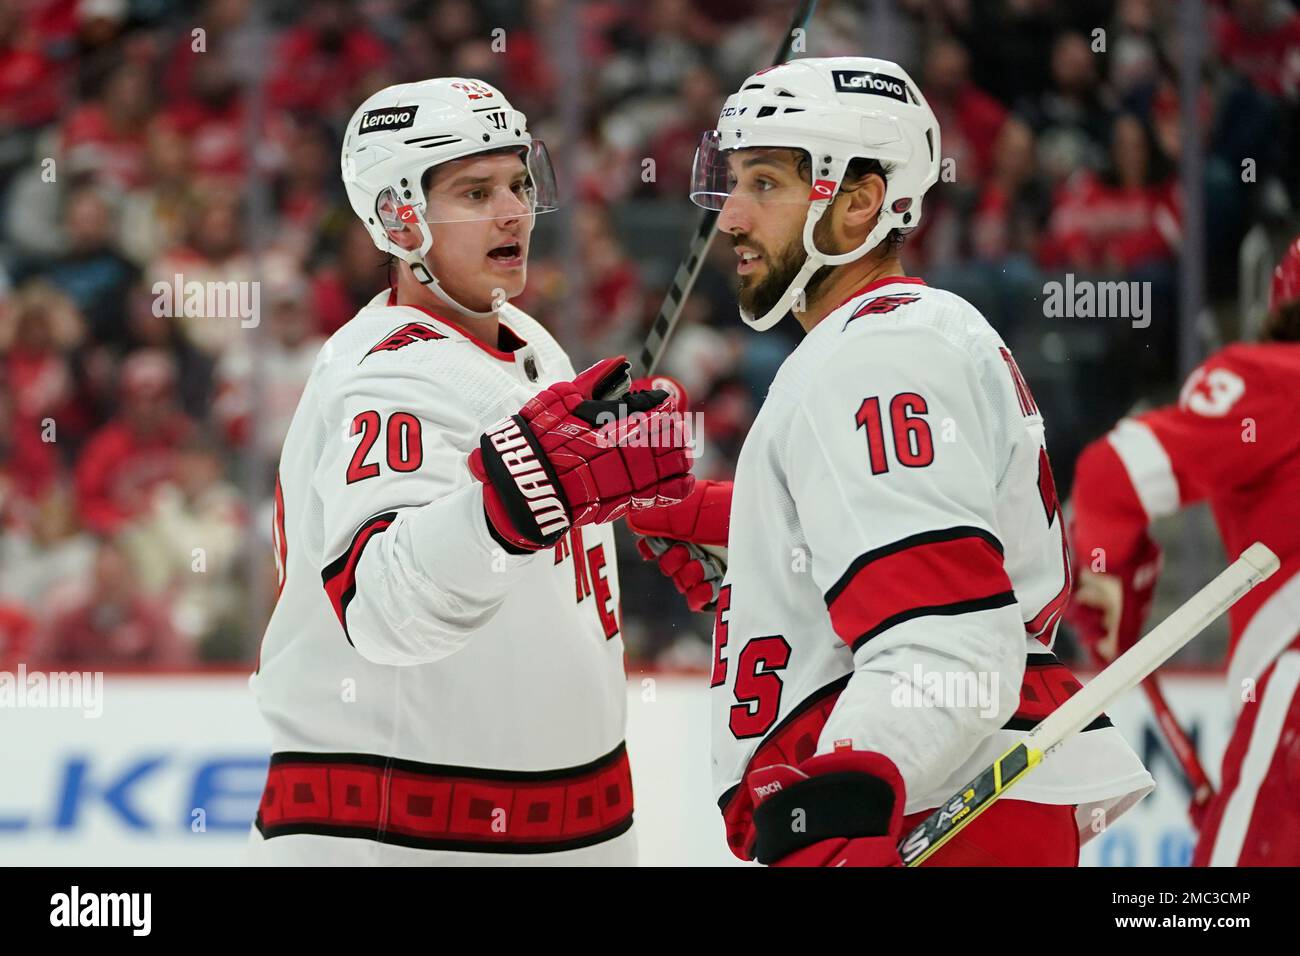 Carolina Hurricanes center Sebastian Aho (20) celebrates his goal with Vincent Trocheck (16) against the Detroit Red Wings in the first period of an NHL hockey game Tuesday, March 1, 2022, in